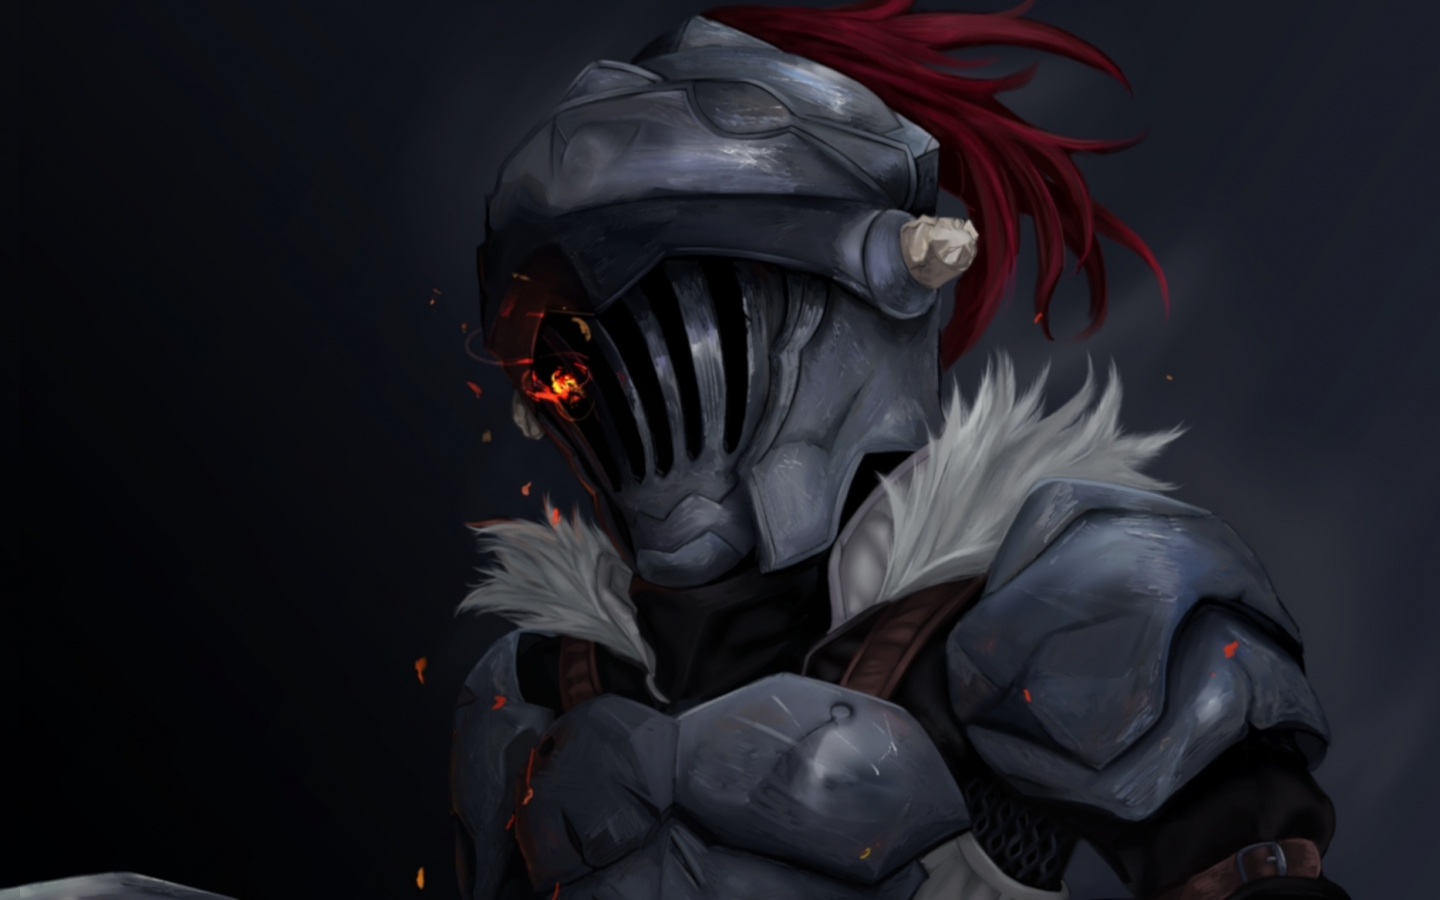 Download 1440x900 Wallpaper Anime Goblin Slayer Soldier Armour Widescreen 16 10 Widescreen 1440x900 Hd Image Background 59